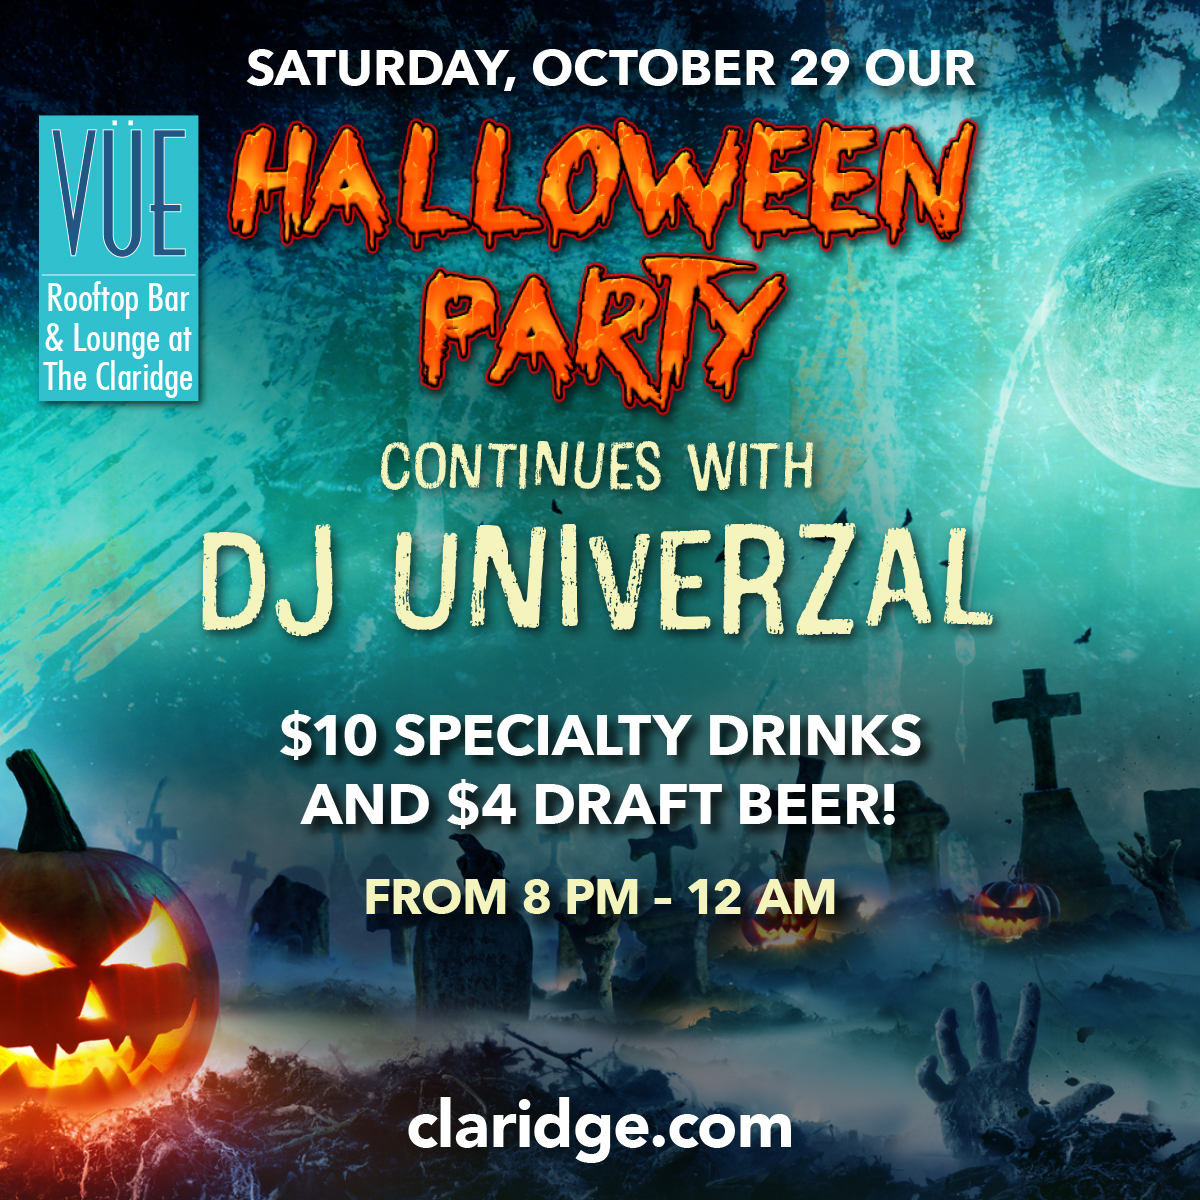 Our Halloween party continues at The VÜE Rooftop Bar & Lounge on Saturday, October 29th from 8pm-12am! Special guest DJ Univerzal, $10 specialty cocktails, and $4 draft beers! 🎃👻🍻 claridge.com